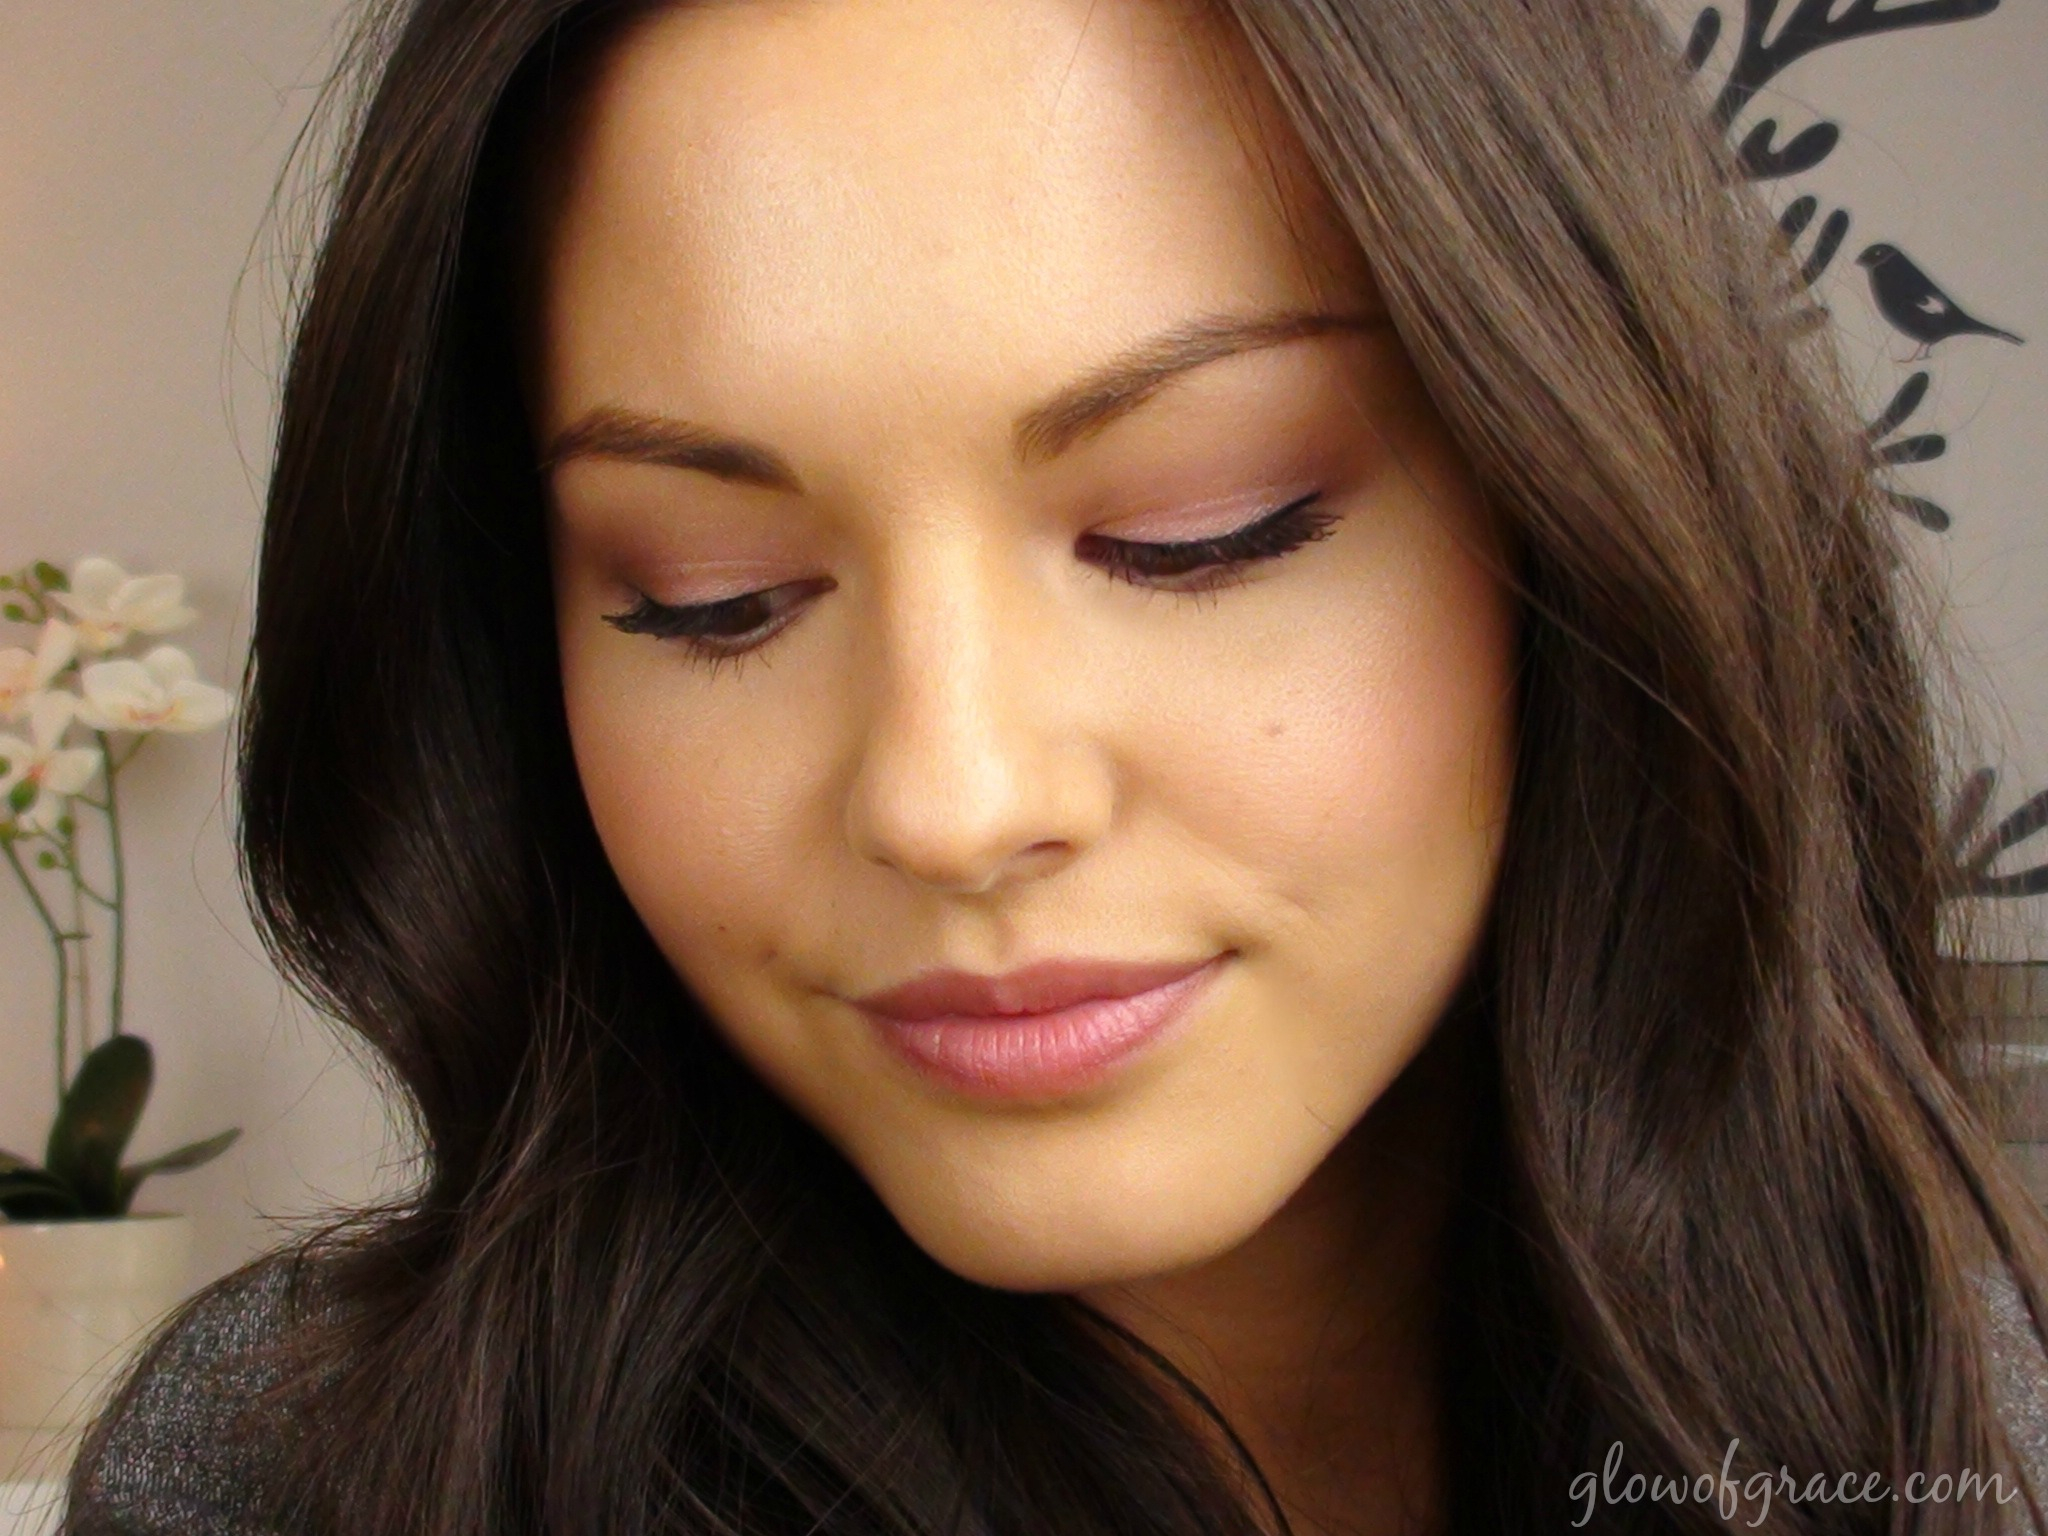 Eye Makeup For Interview Urban Decay Naked3 Palette Makeup 101 For Interviews Rachel Weiland